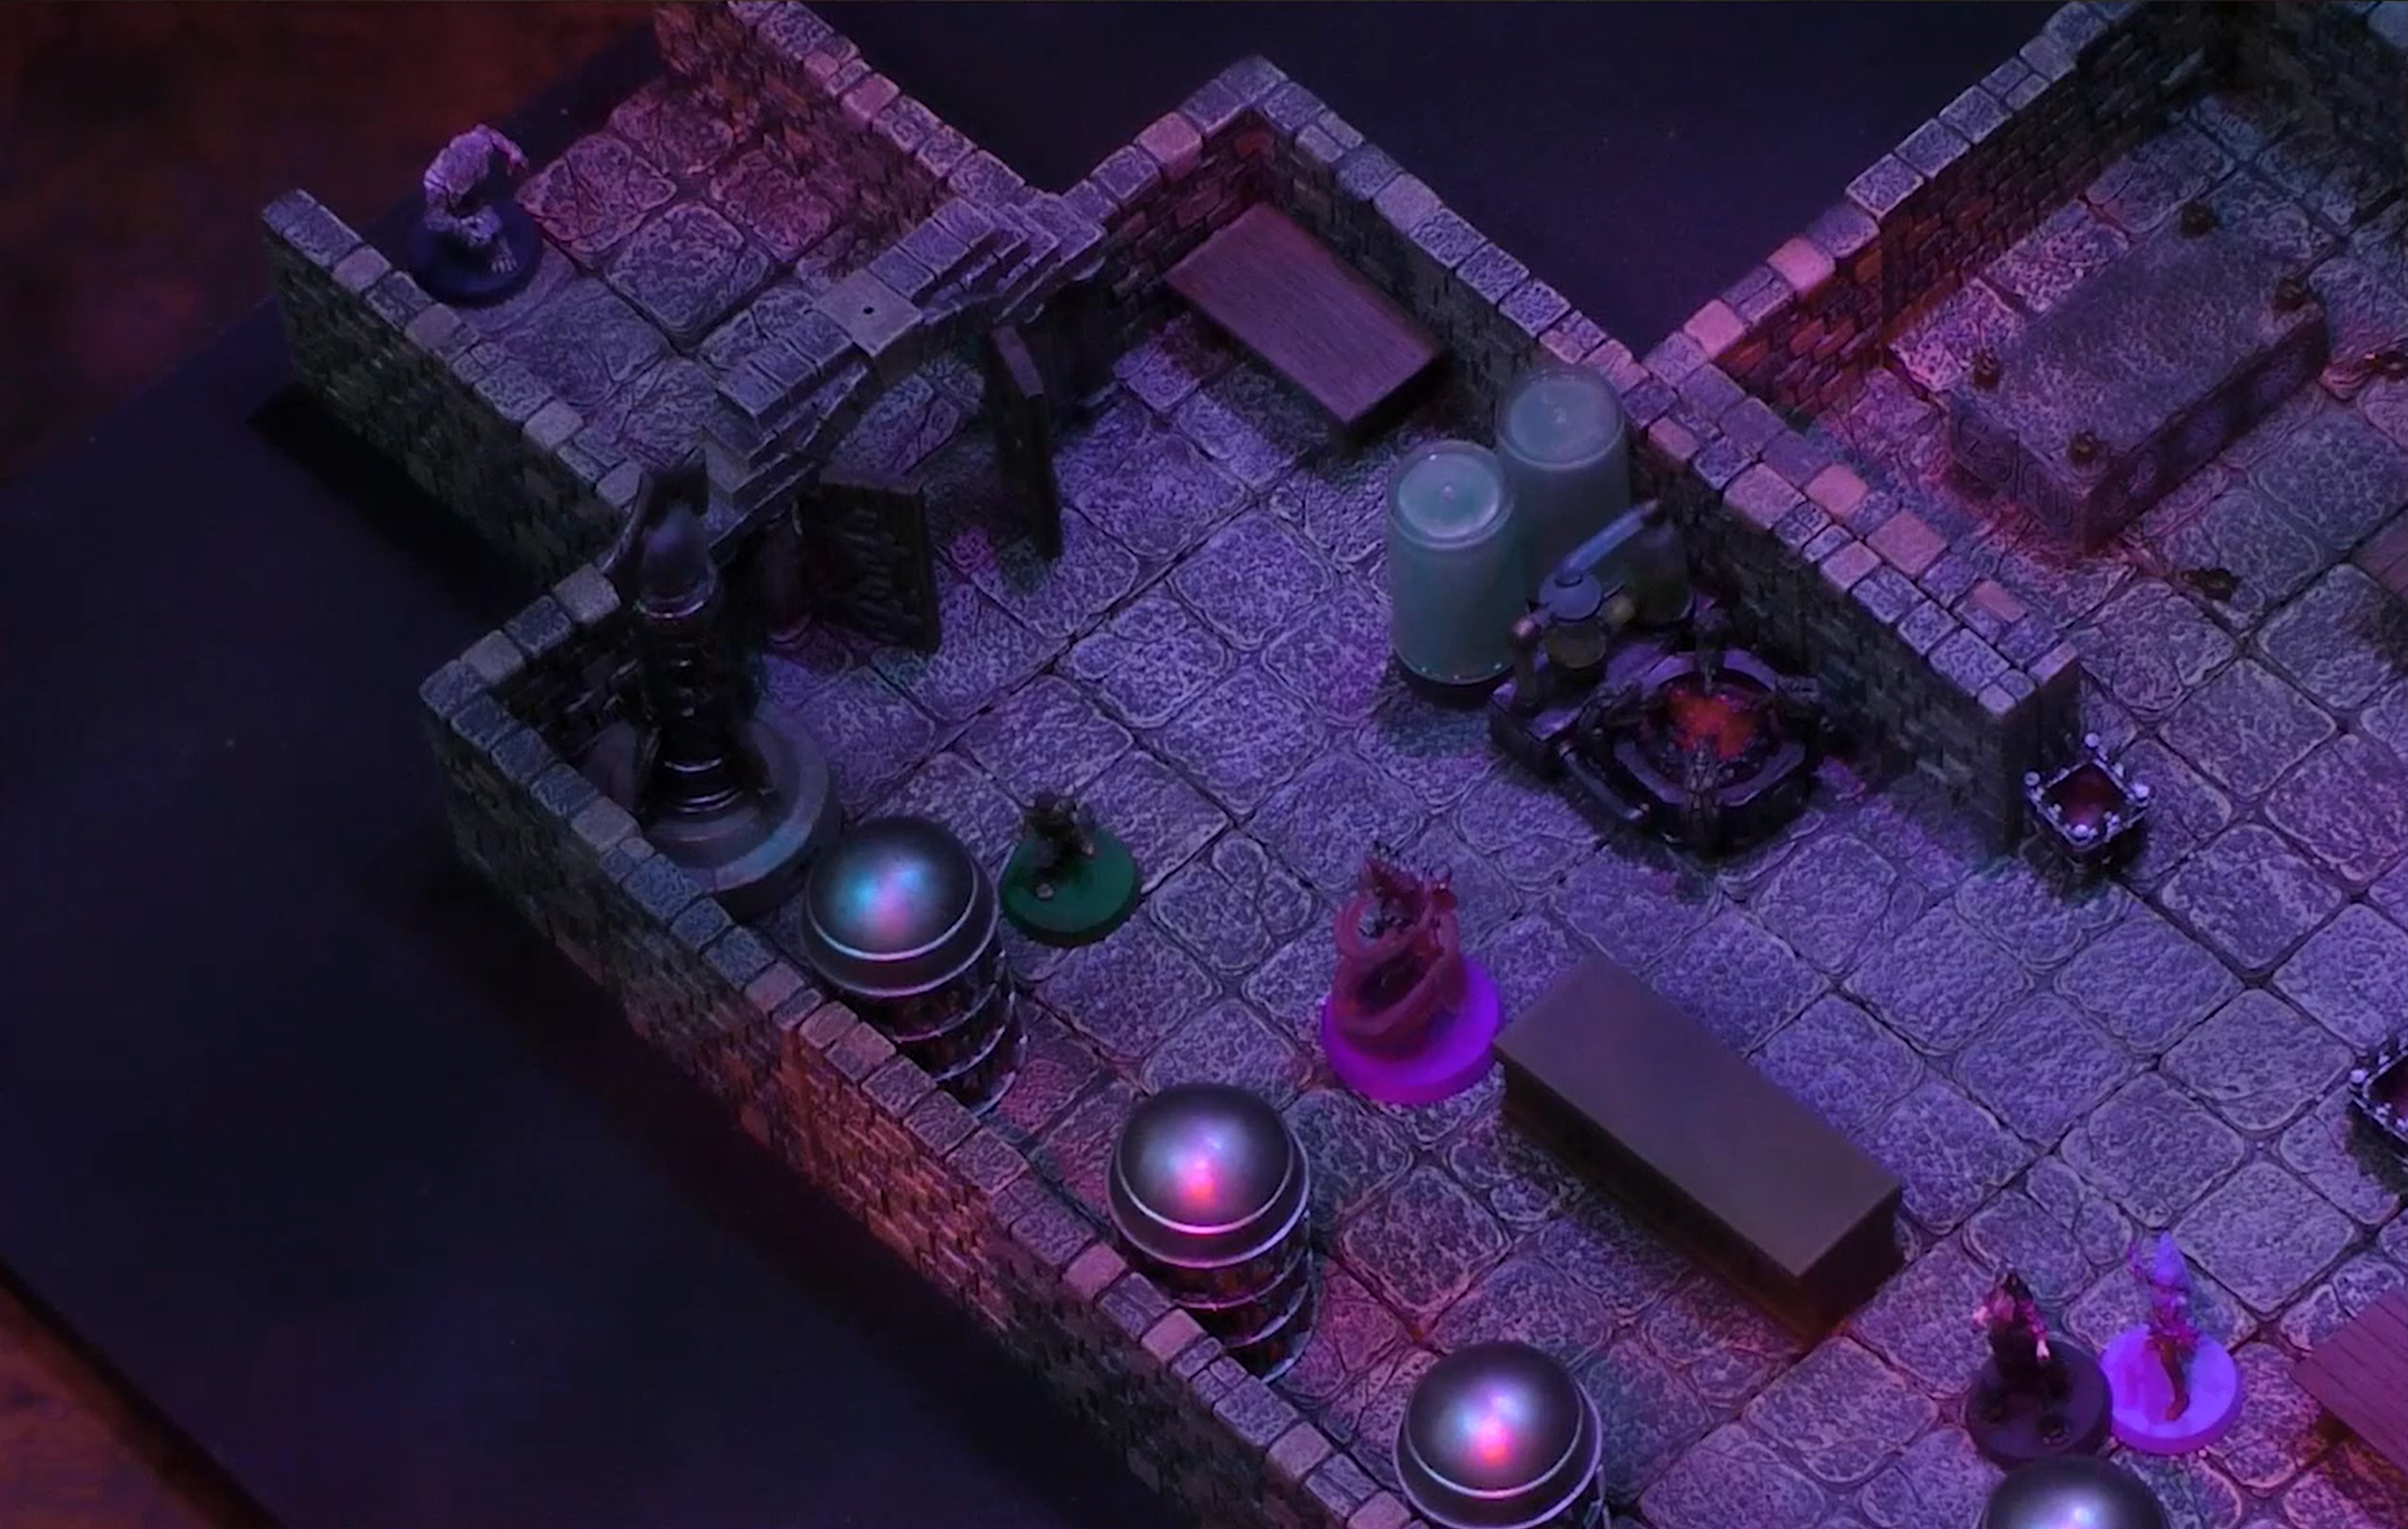 A battlemap of a stone room containing two large cylindrical glass tubes, a forge-like apparatus, and a line of round metal cages against the wall. Imogen and Laudna are across a table from a Reiloran Mystic surrounded by a purple swirl. Orym is behind them, and further back through an open door is Chetney in wolf form.